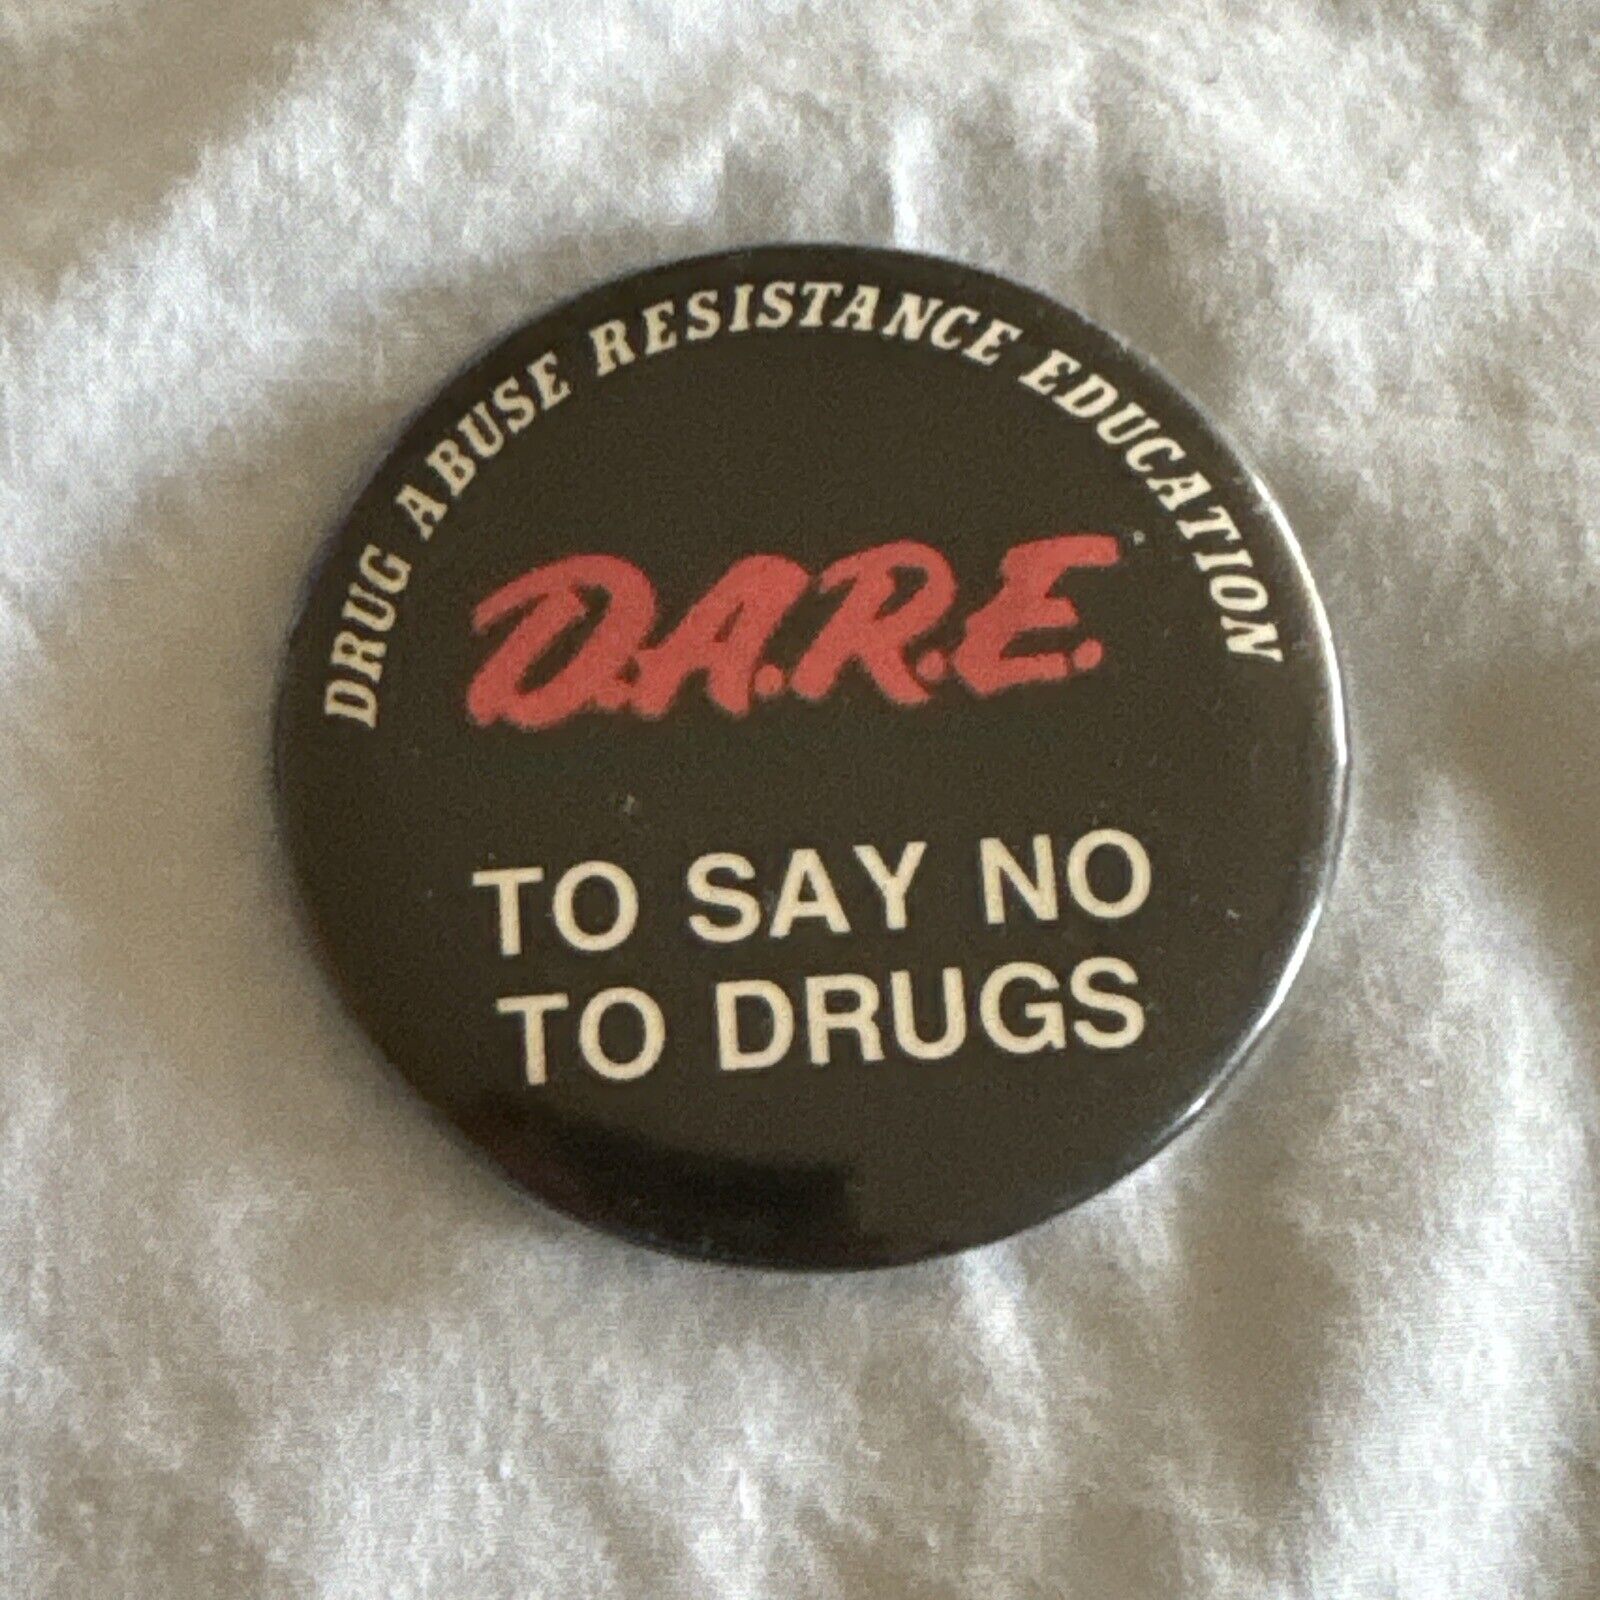 DARE Drug Abuse Resistance Education To Say No To Drugs Pin Button Vintage 1990s